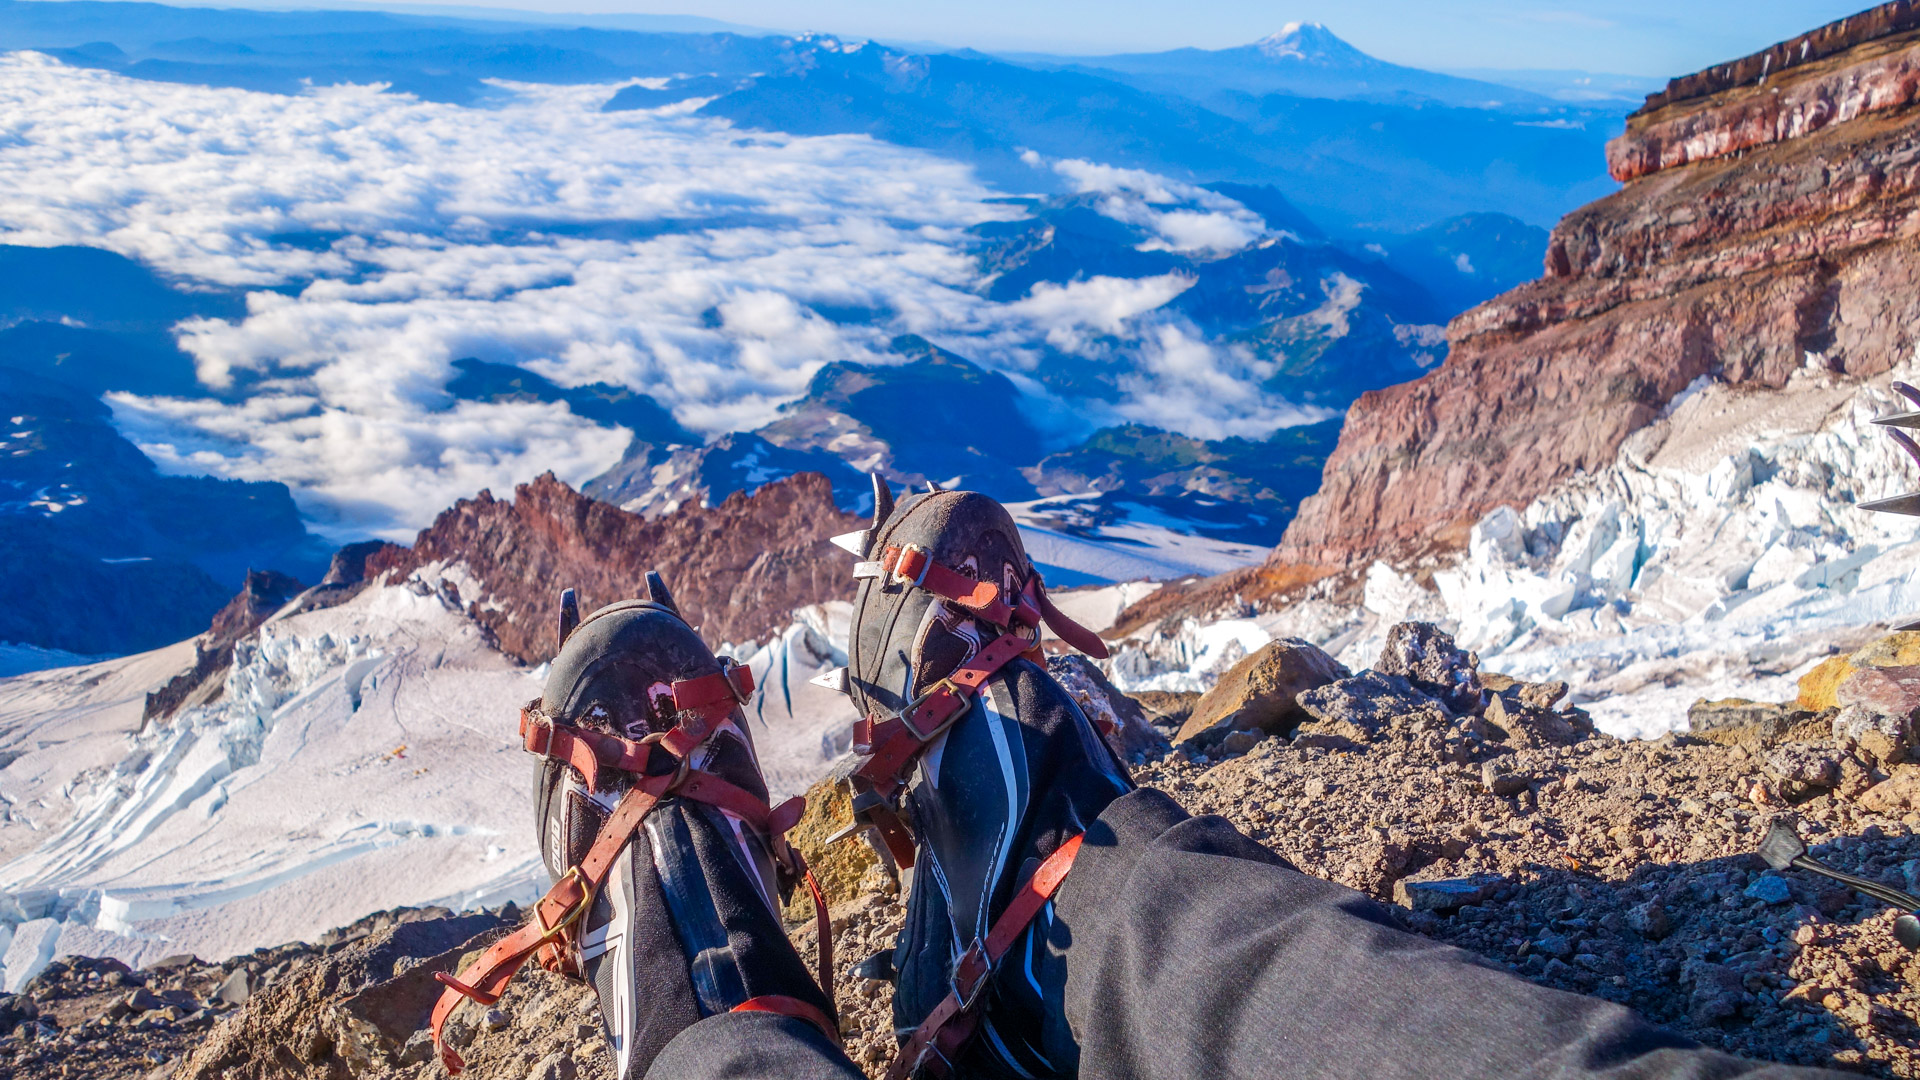 Can The Lightest Mountaineering Boots Ever Handle Mt Rainier?